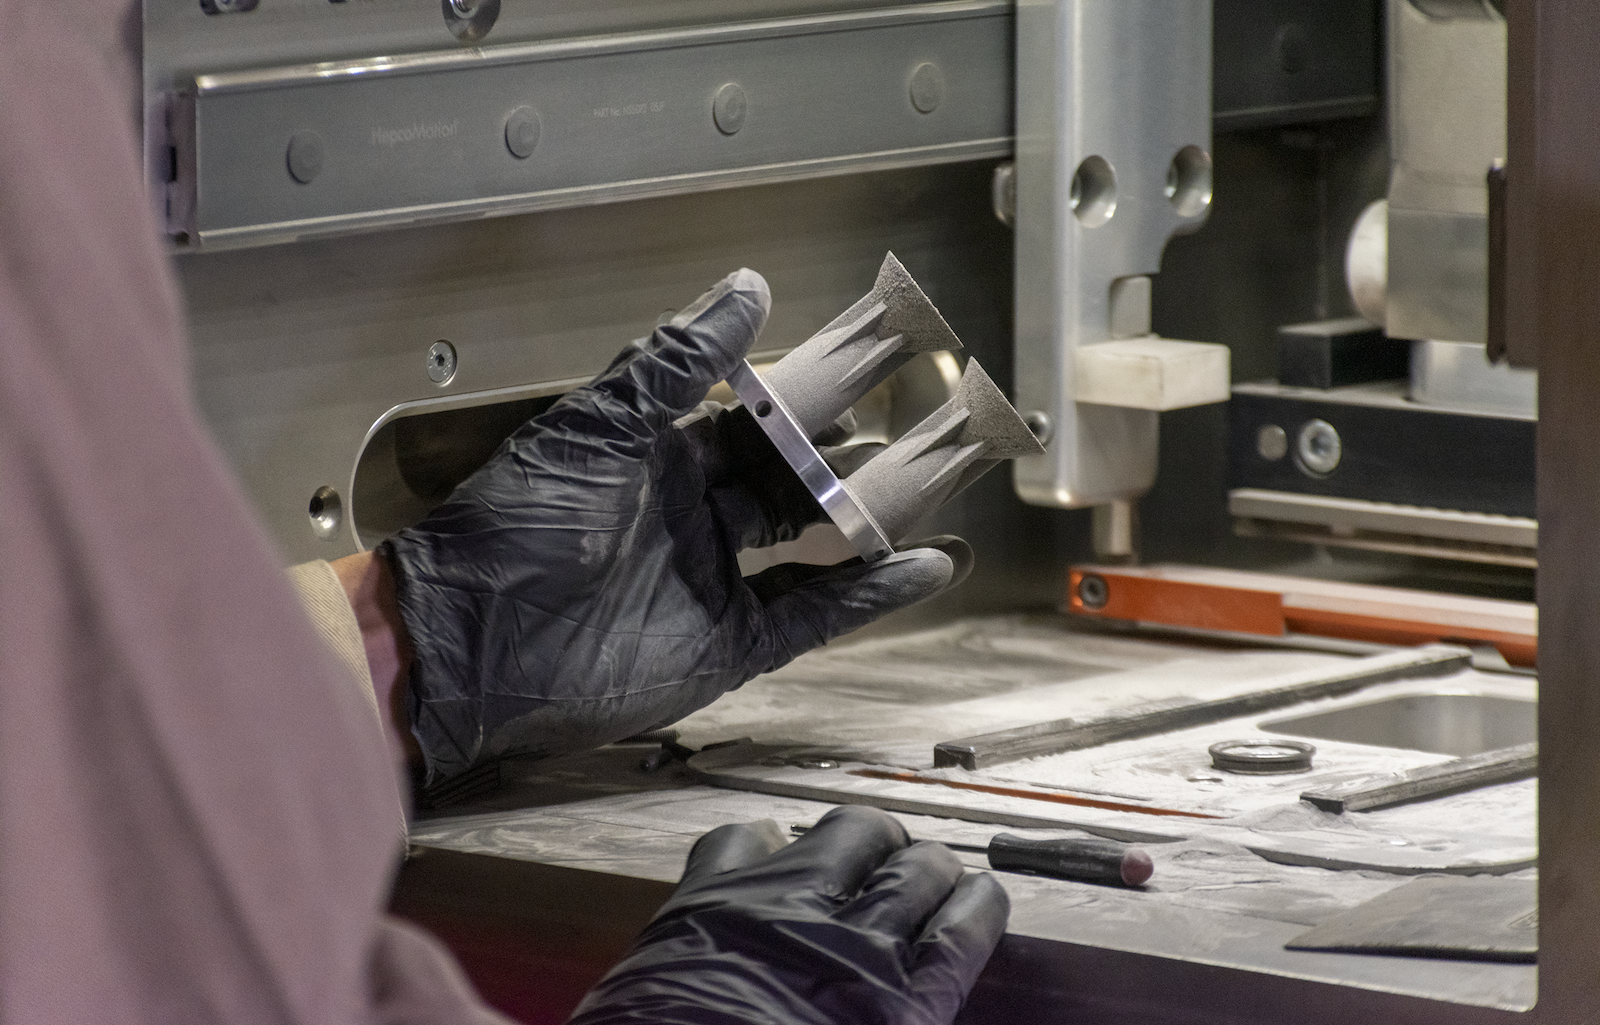 Additive manufacturing with 7A77.60L aluminum alloy: An HRL scientist completes visual inspection of 3D-printed micro-thrusters after build completion .